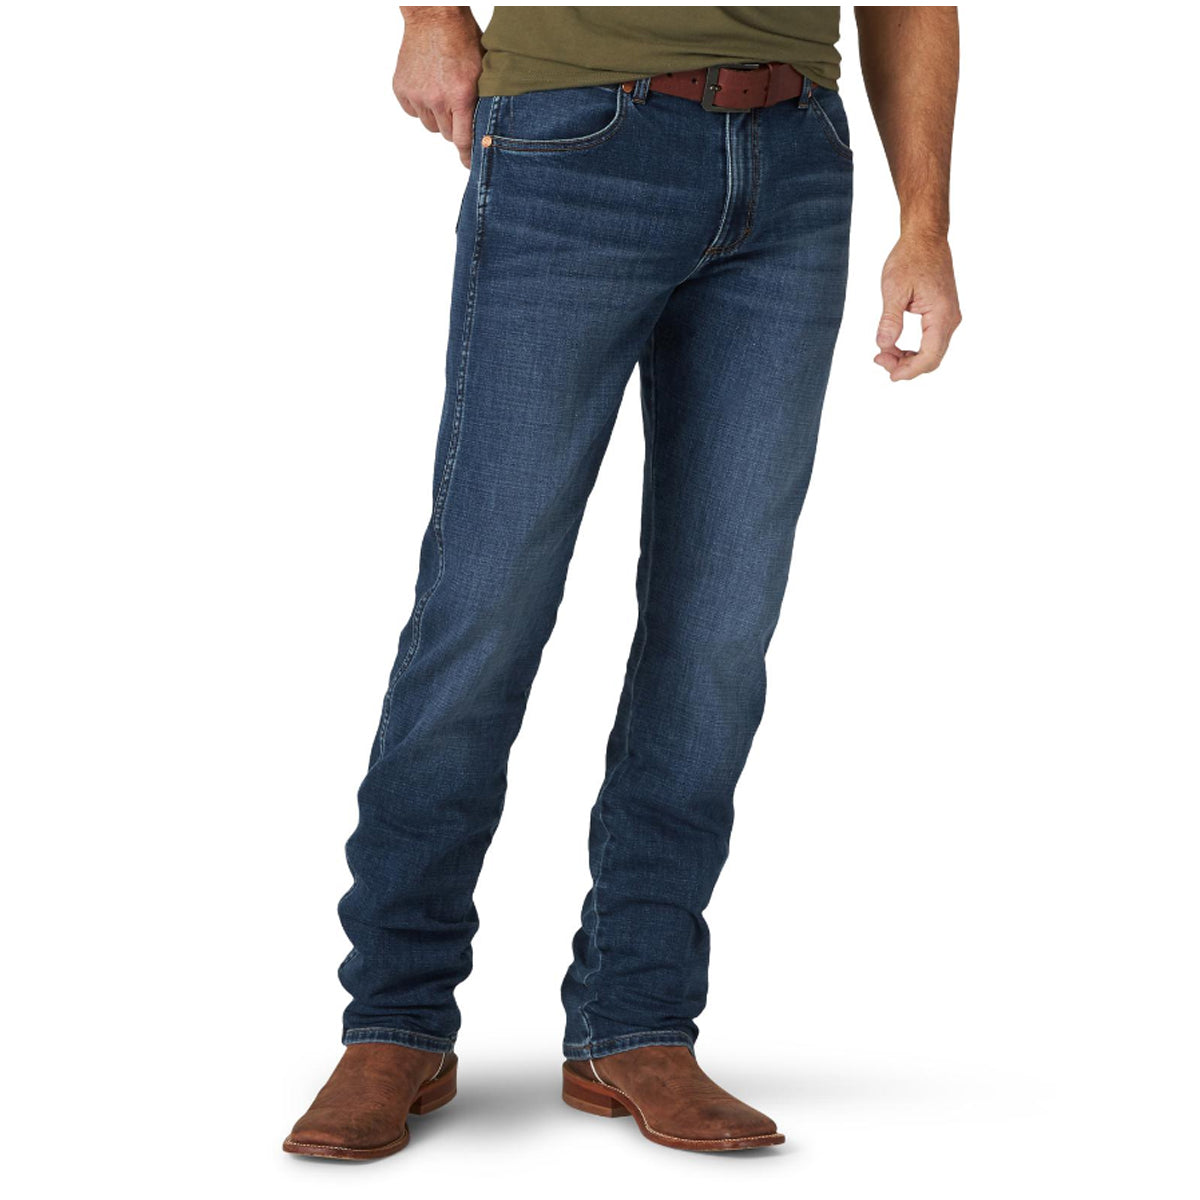 wrangler rock and roll jeans